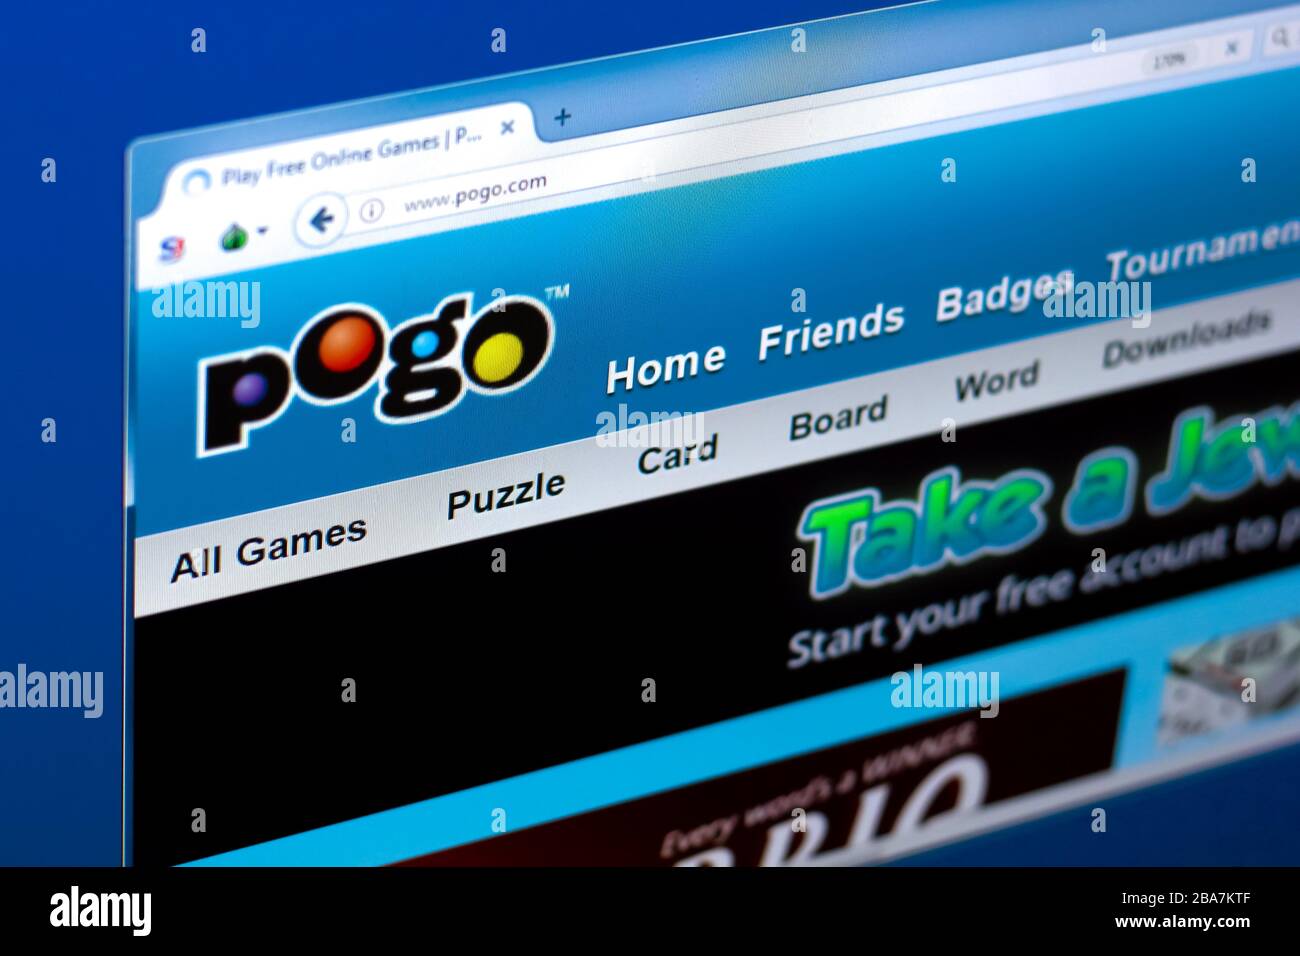 POGO website - online puzzles and games Stock Photo - Alamy